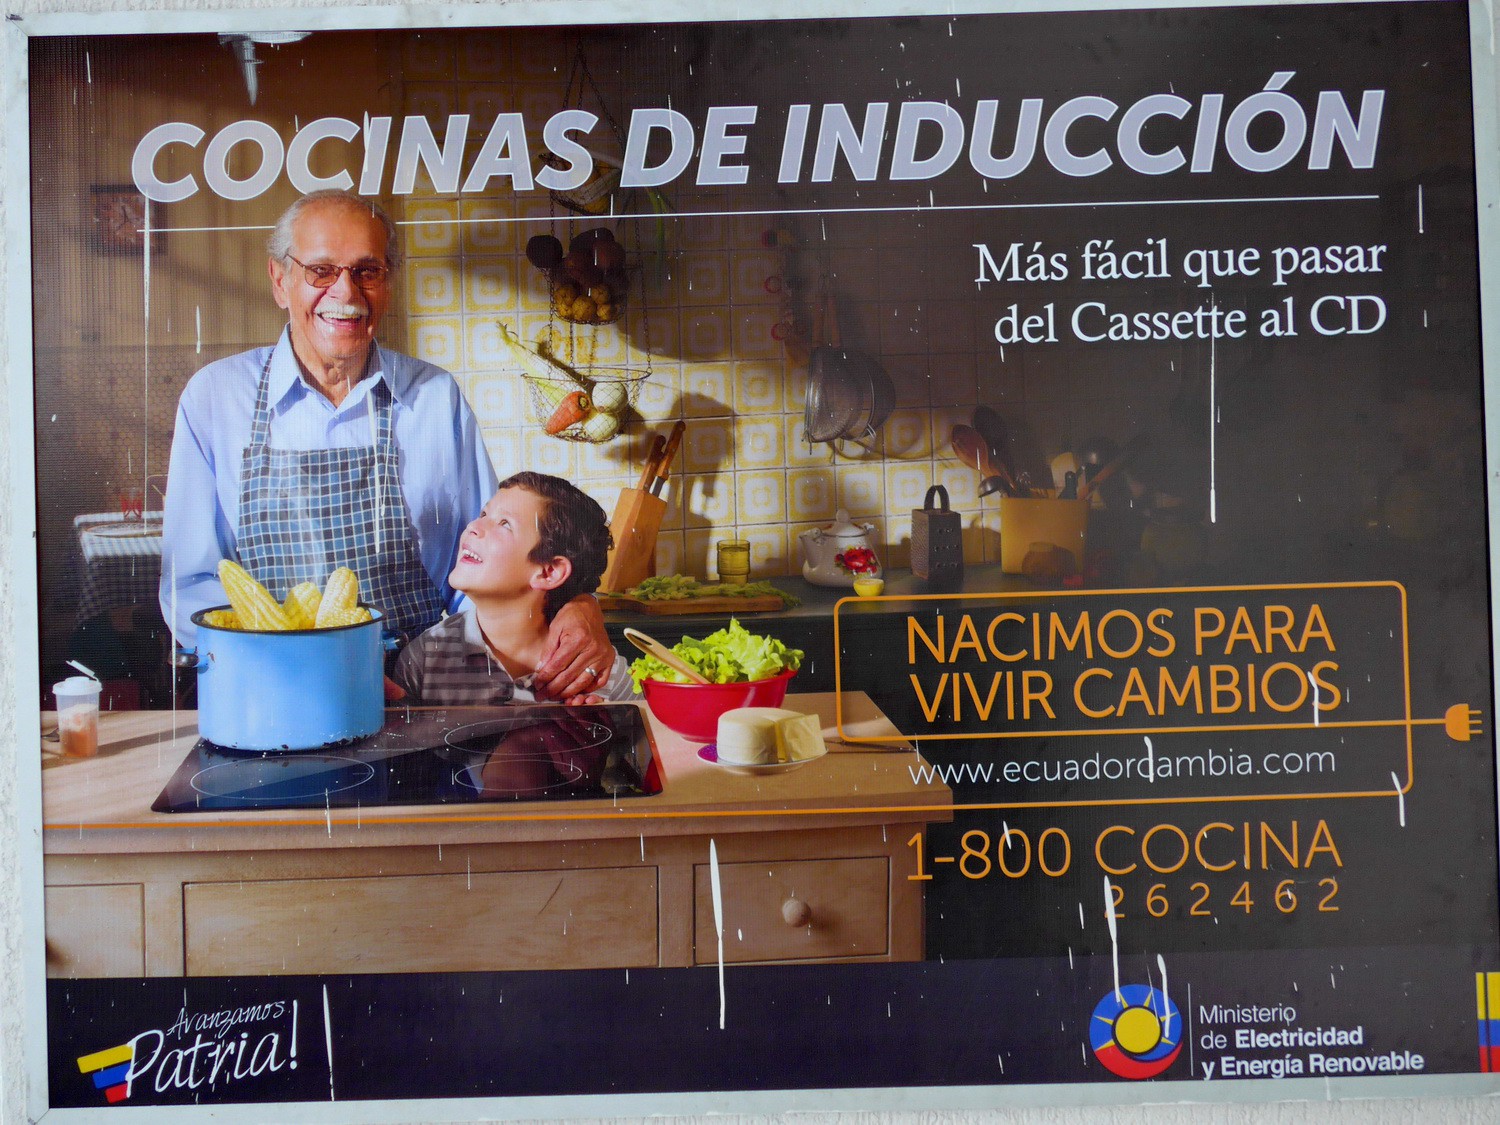 Advertisement of an induction cooker in Ibarra